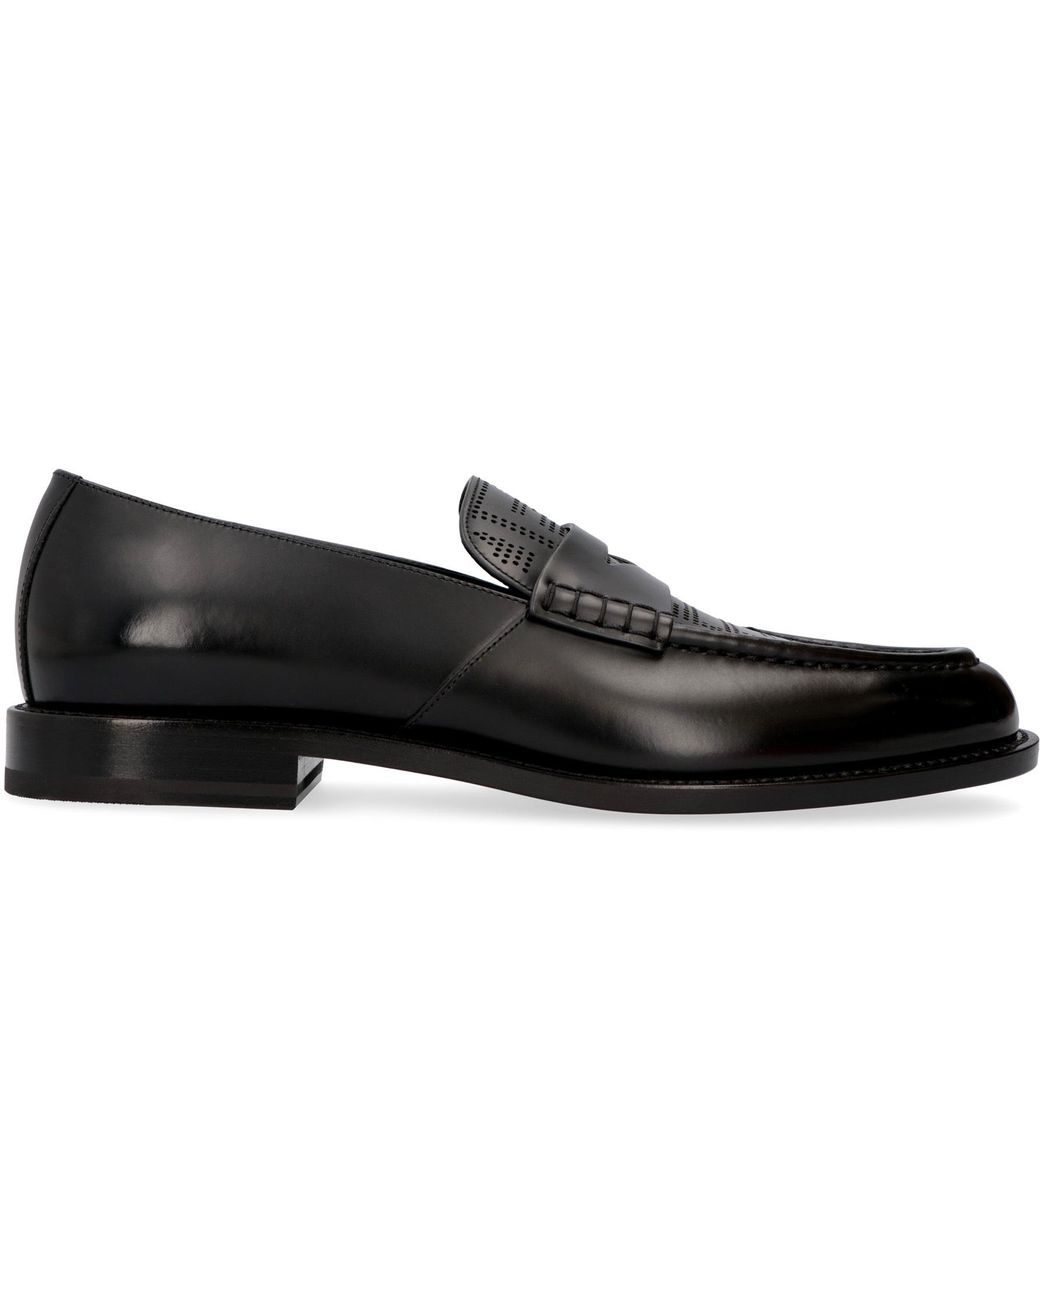 Fendi Leather Loafers in Black for Men - Lyst